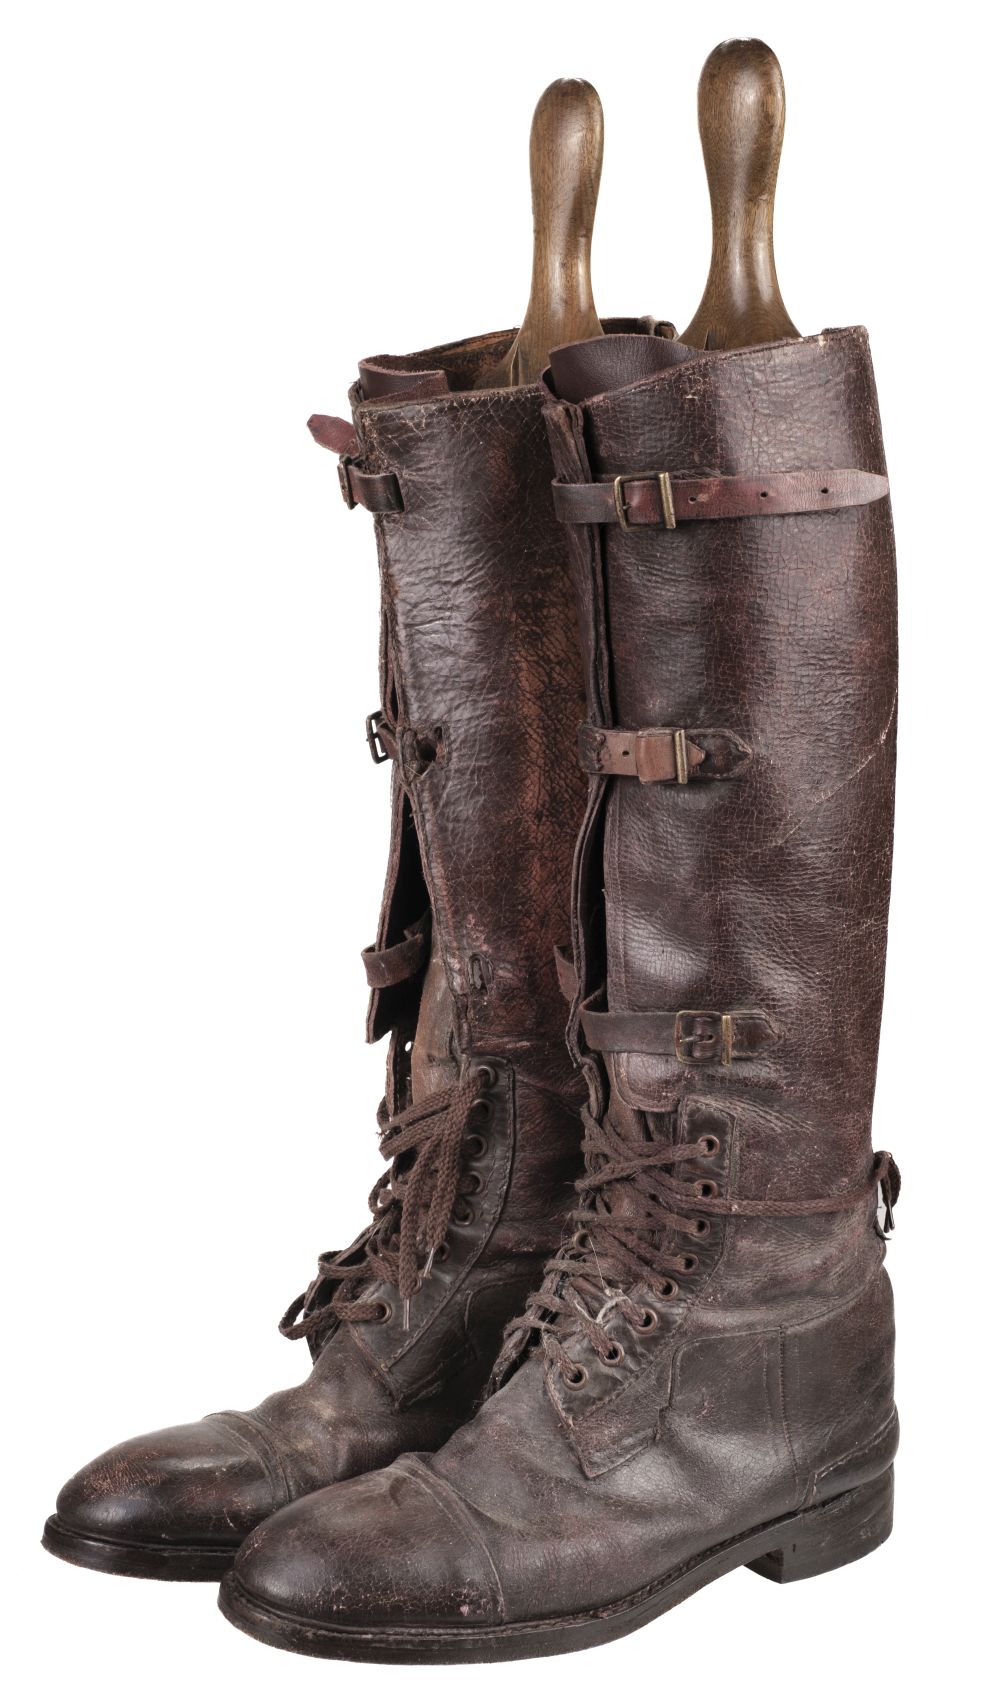 WWI Boots. A pair of WWI brown leather officer's boots